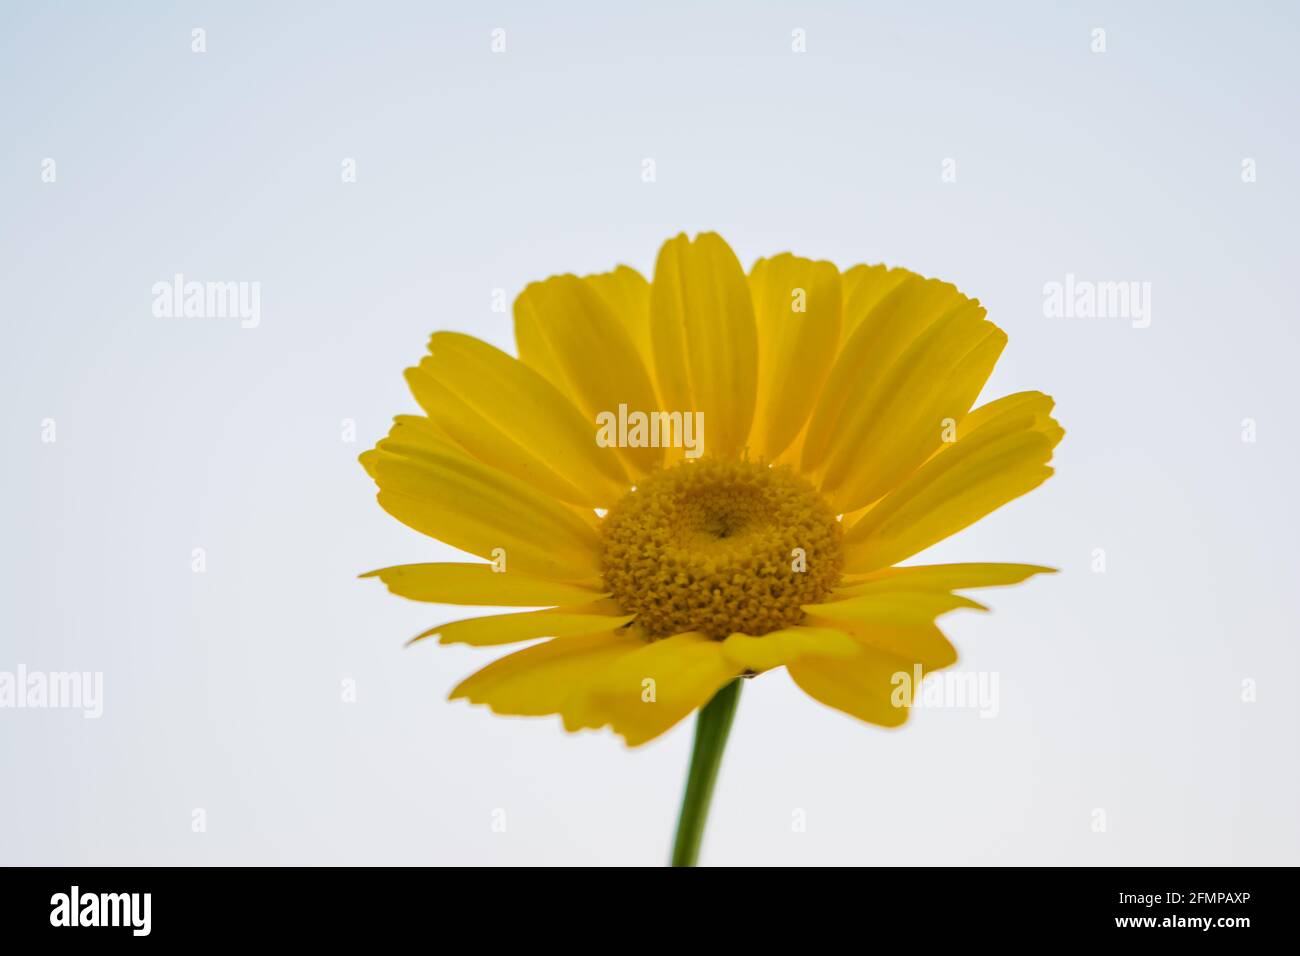 Yellow Mexican sunflower weed (Tithonia diversifolia). Flower of yellow petals with selective focus. Stock Photo